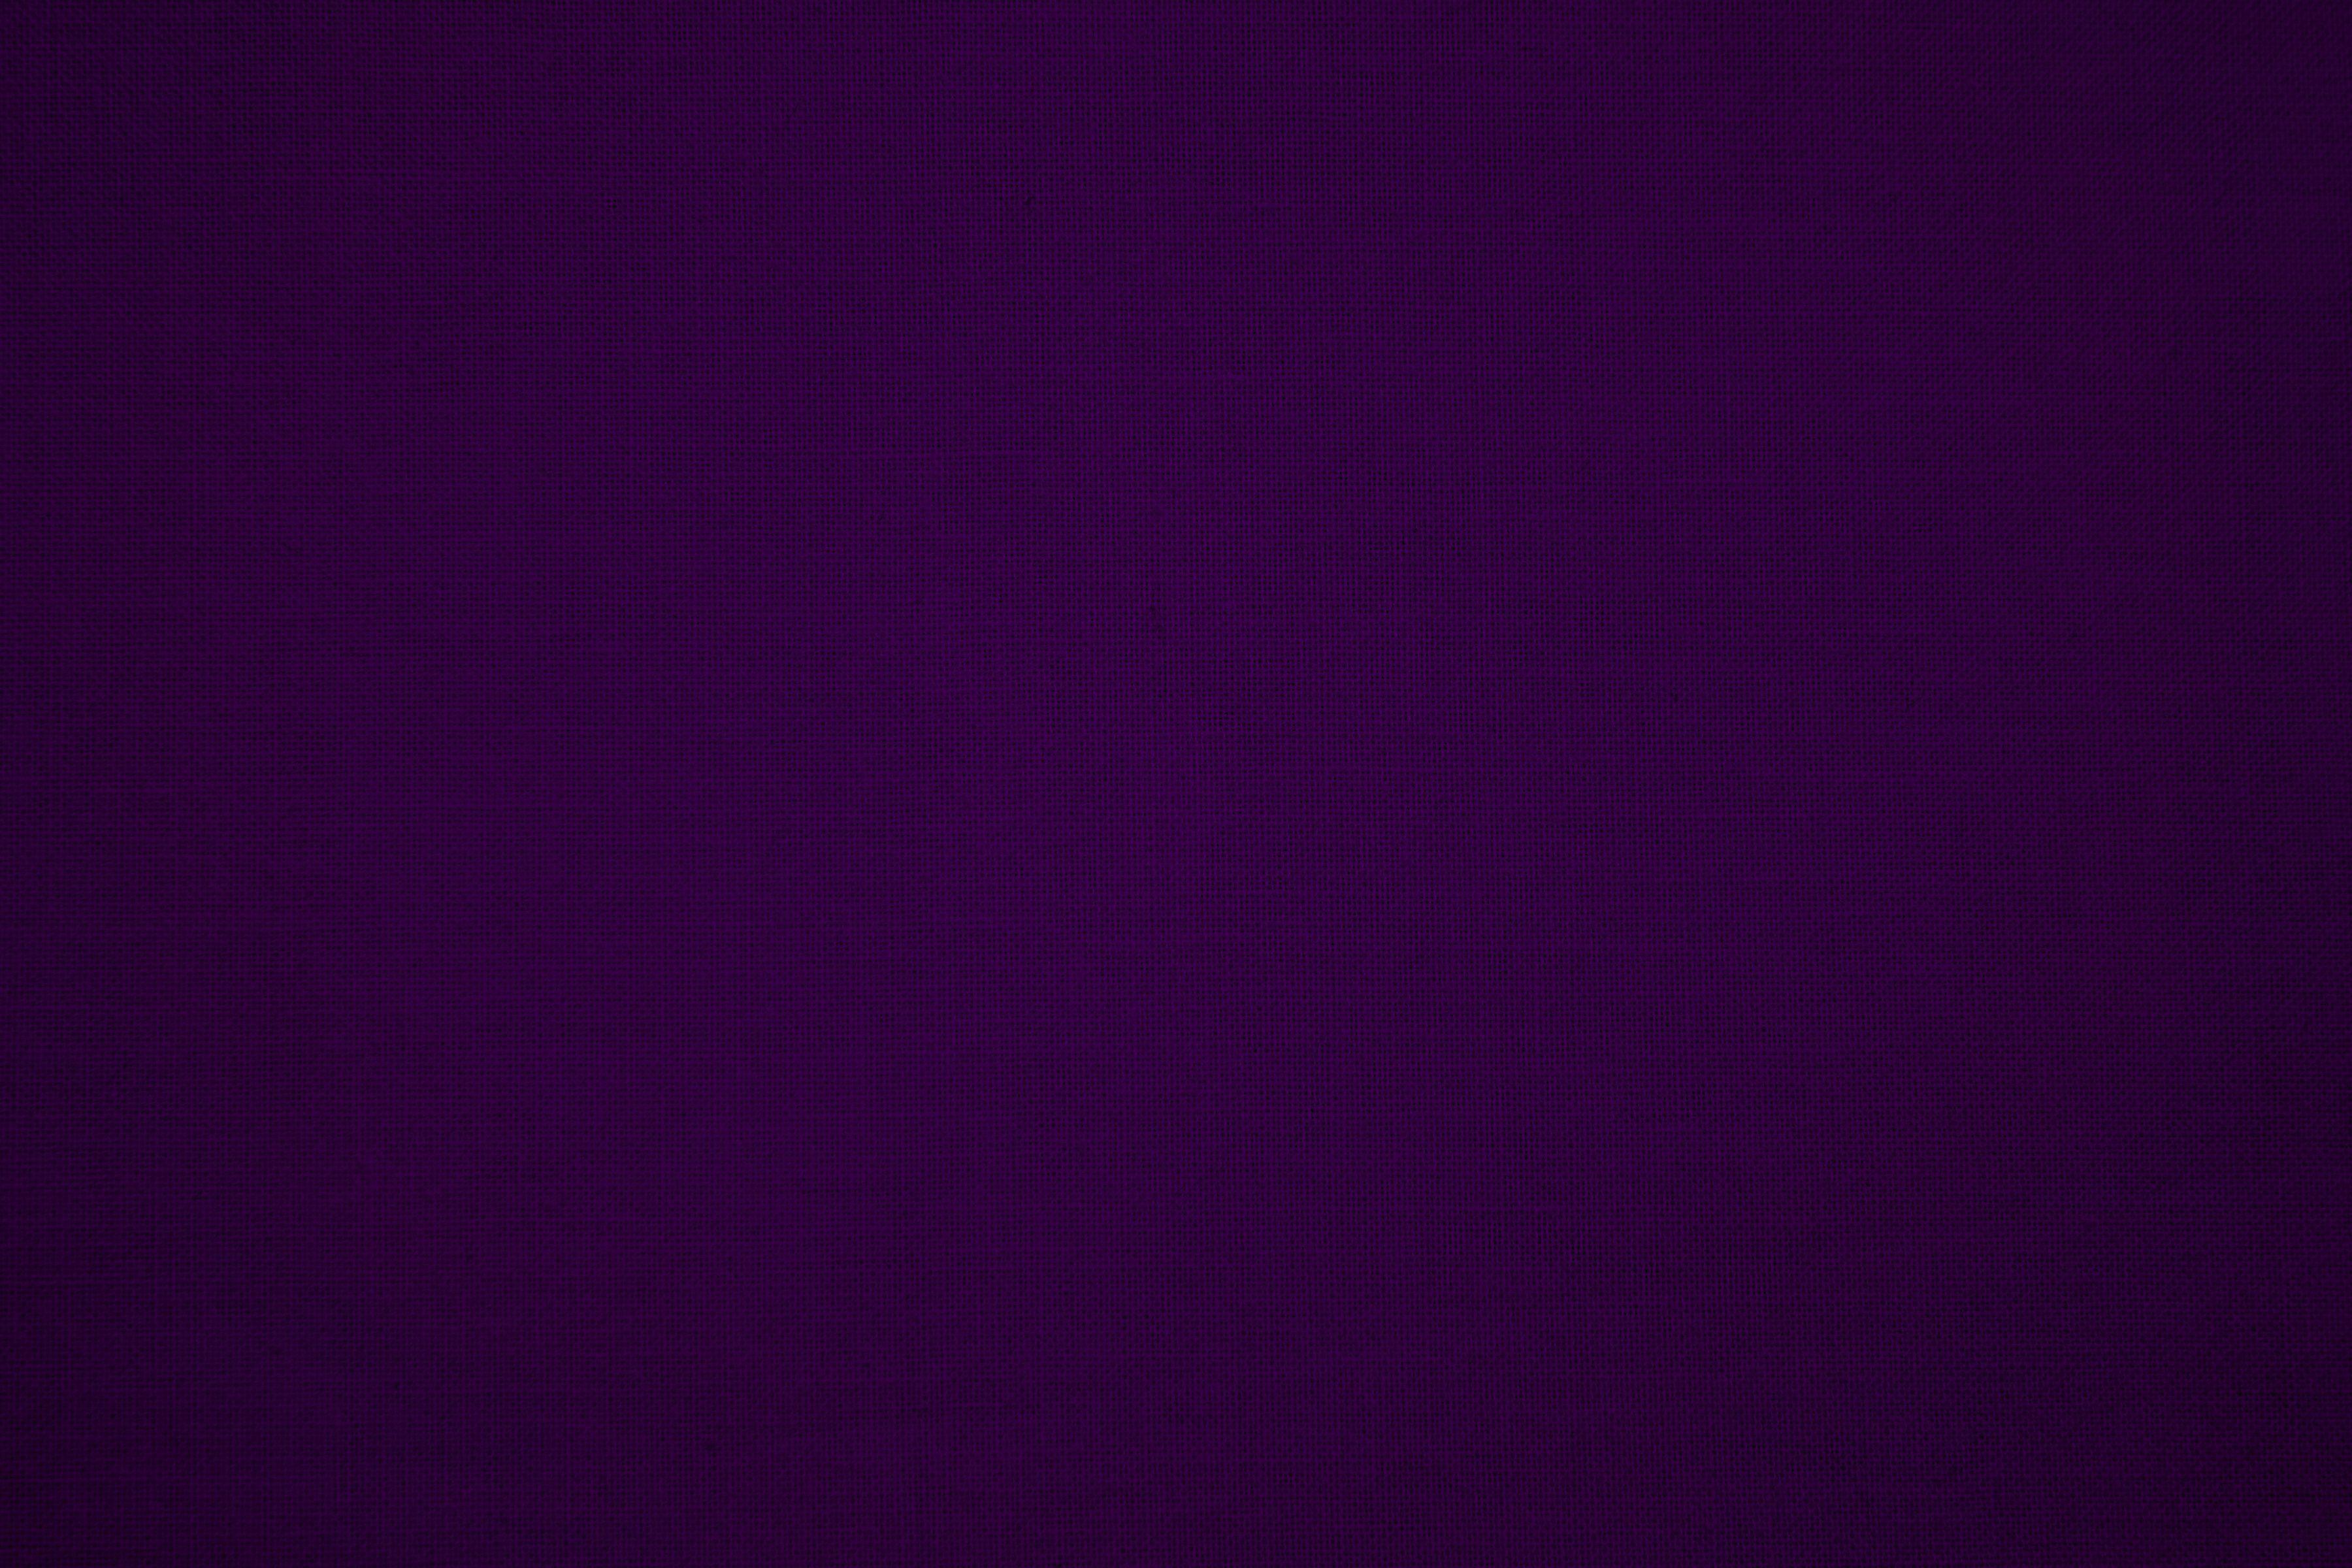 plain purple background 10. Background Check All